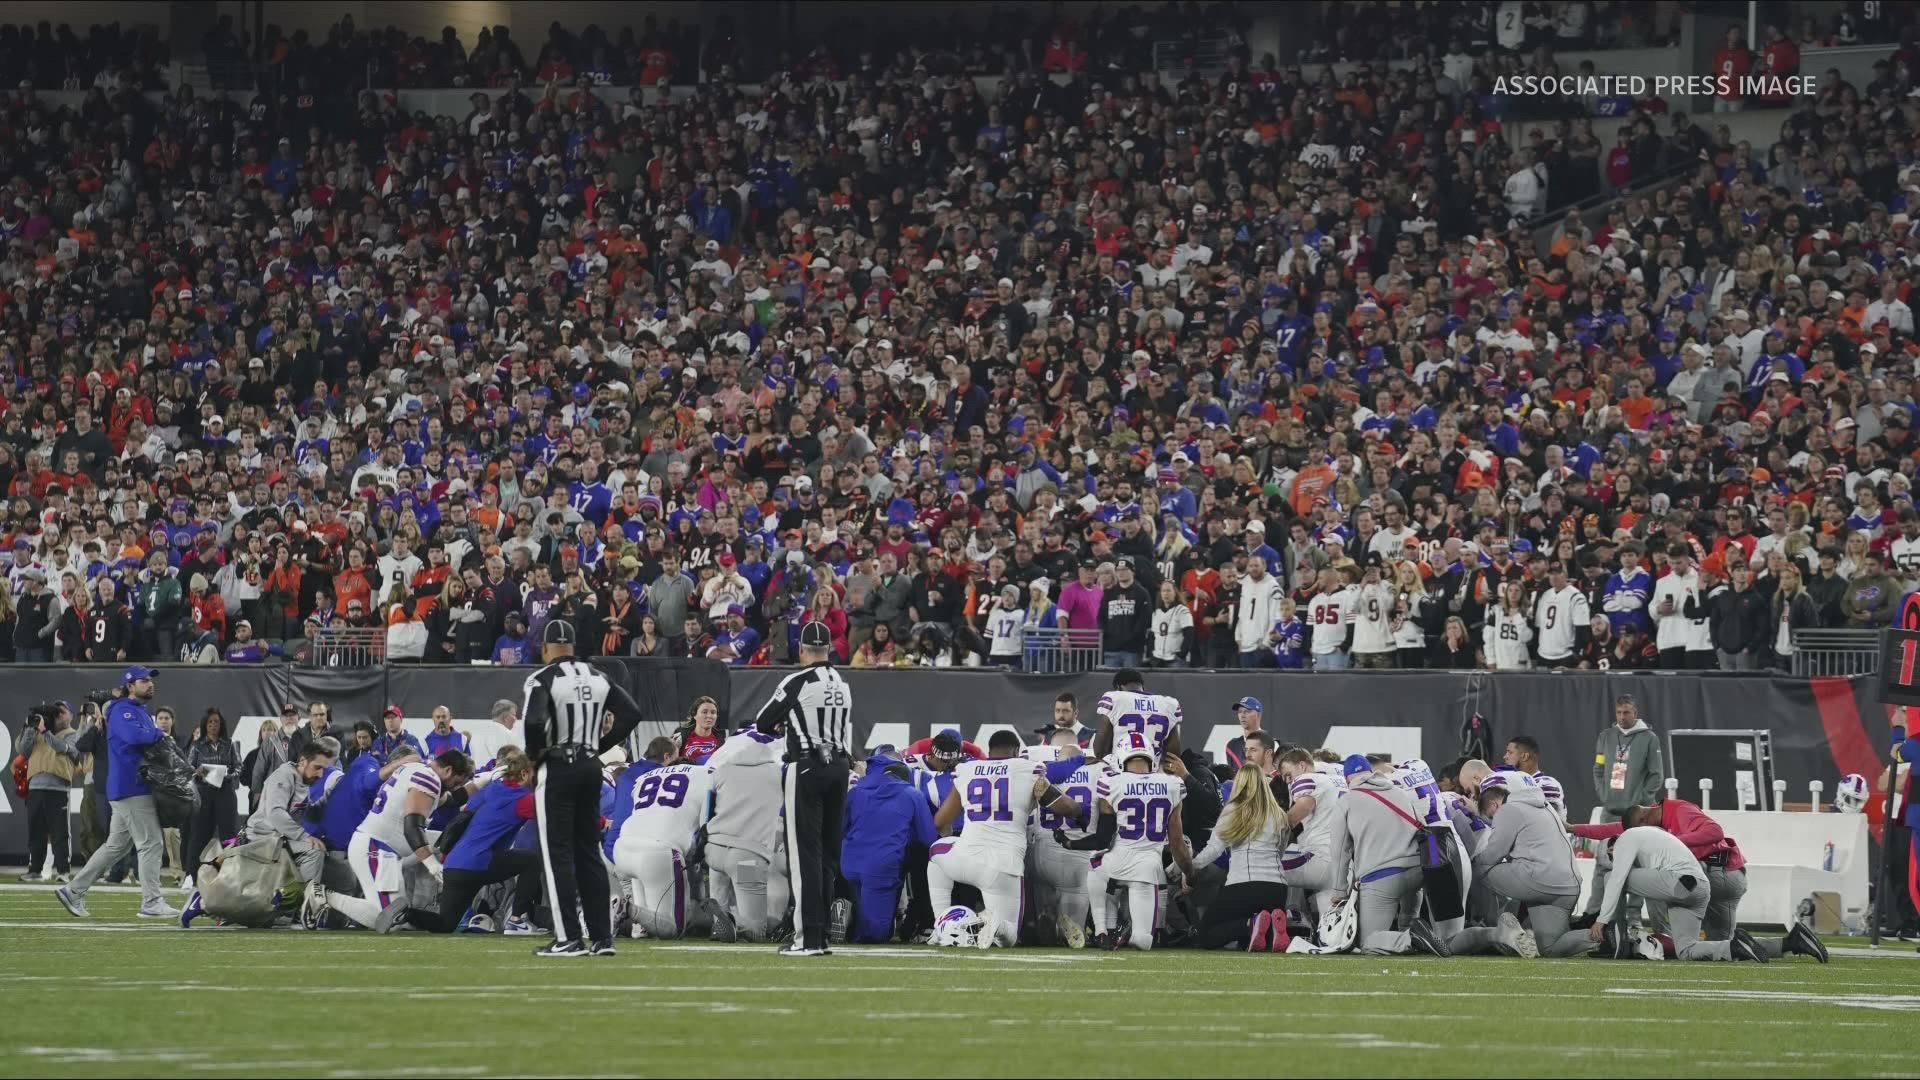 Hamlin collapsed from cardiac arrest at Monday's game against the Bengals. He had to be resuscitated on the field.